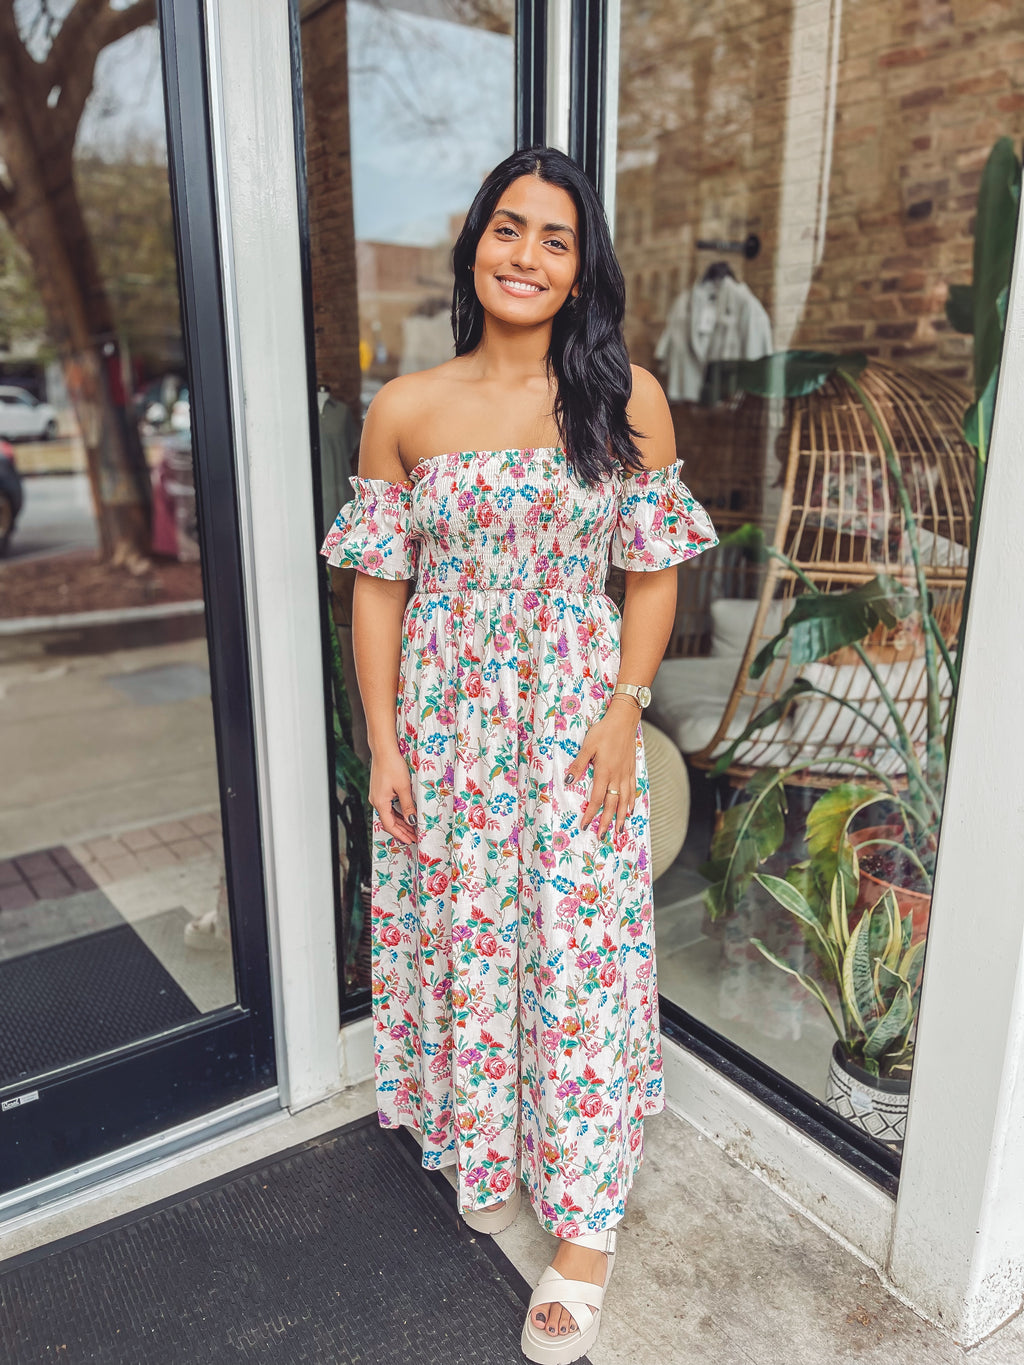 With wild flowers maxi